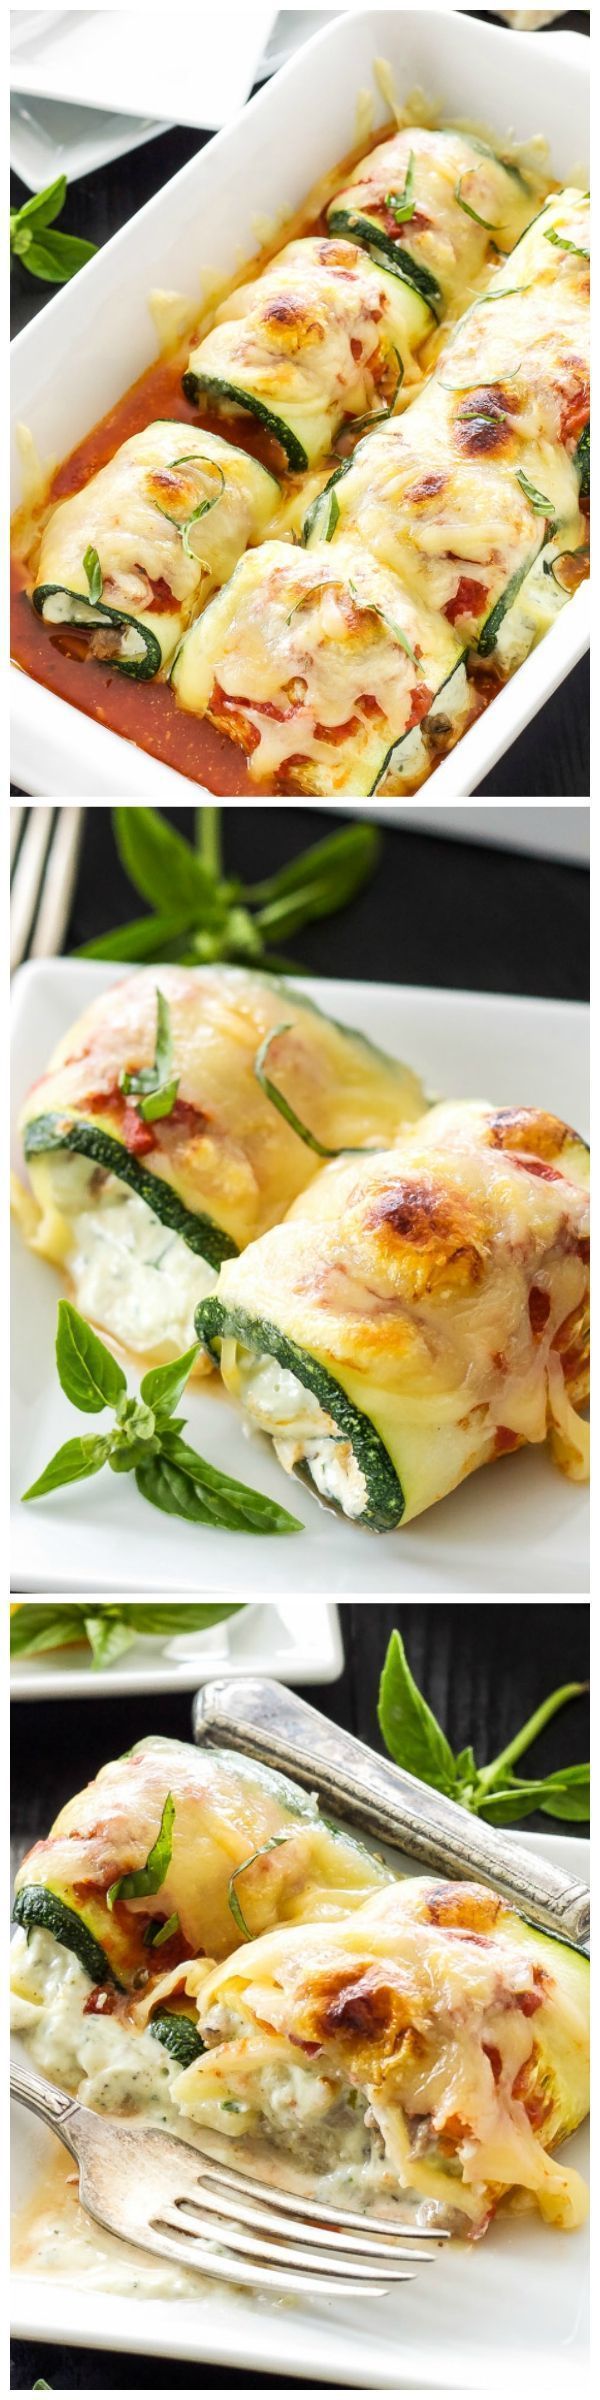 Delicious lasagna rolls made using zucchini instead of pasta. A healthy, gluten free alternative with all the flavor of the